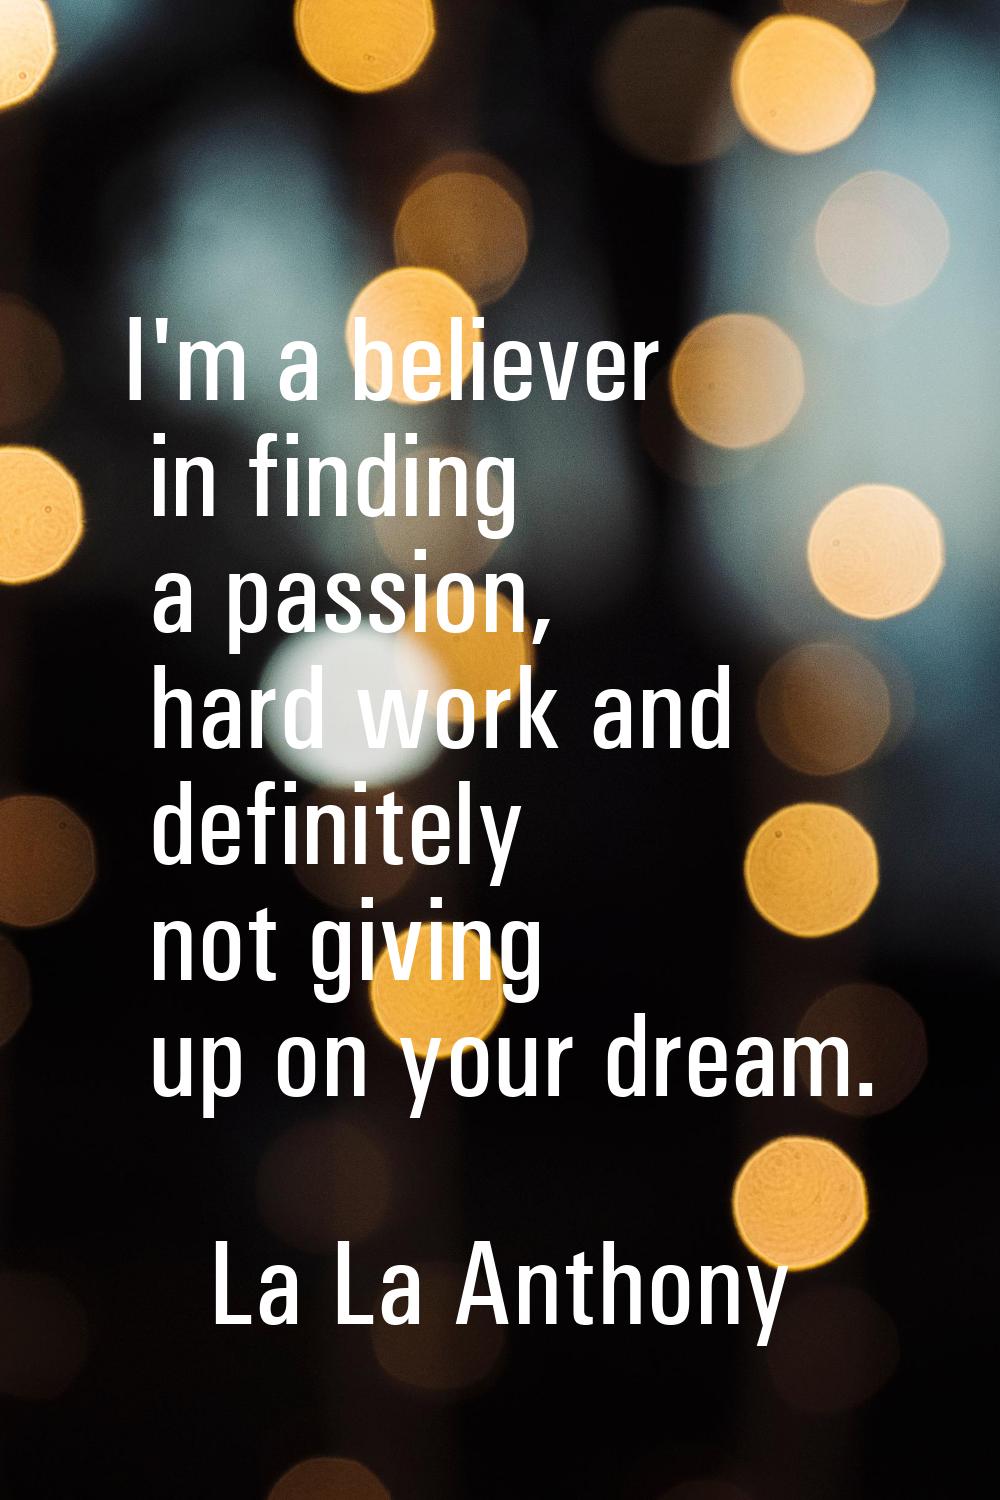 I'm a believer in finding a passion, hard work and definitely not giving up on your dream.